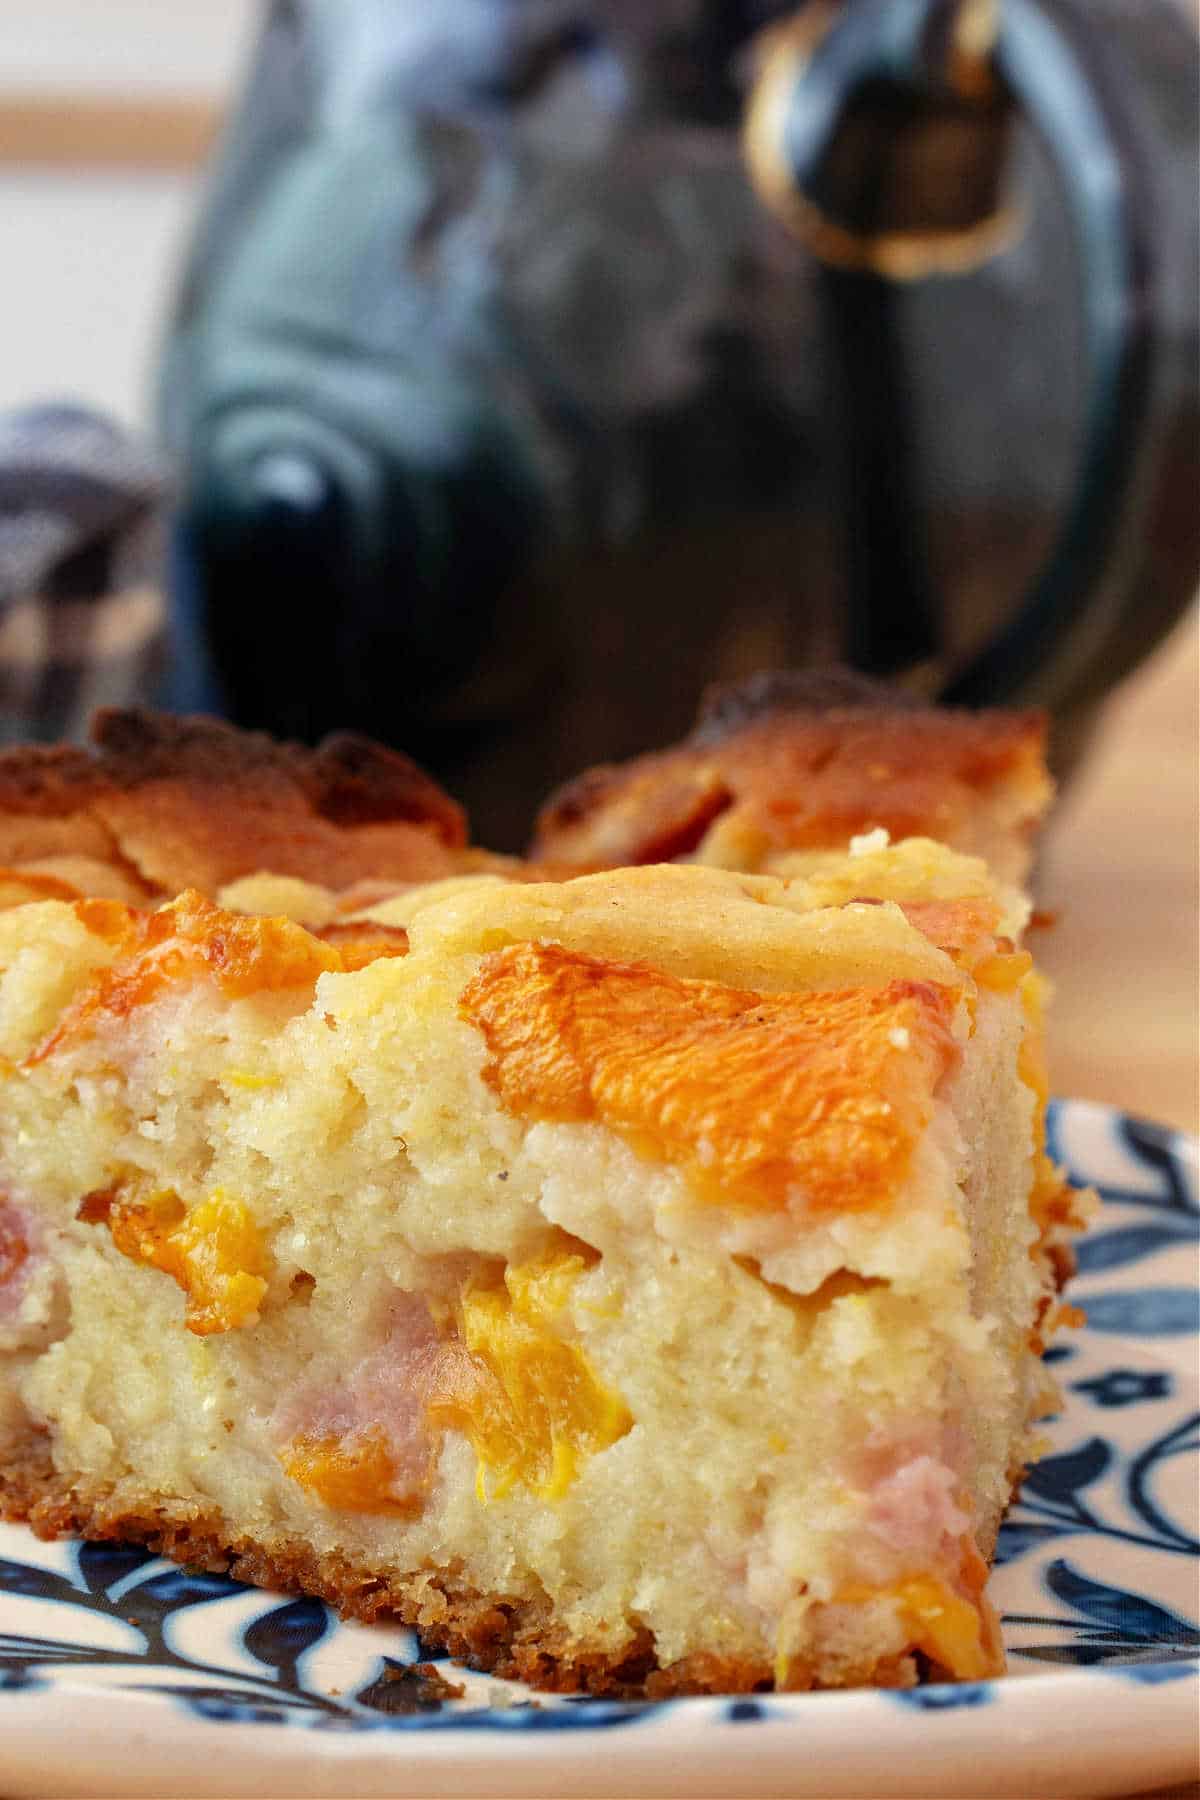 A close up of the side of a cake showing lots of diced peaches in it as well as sliced peaches on top.